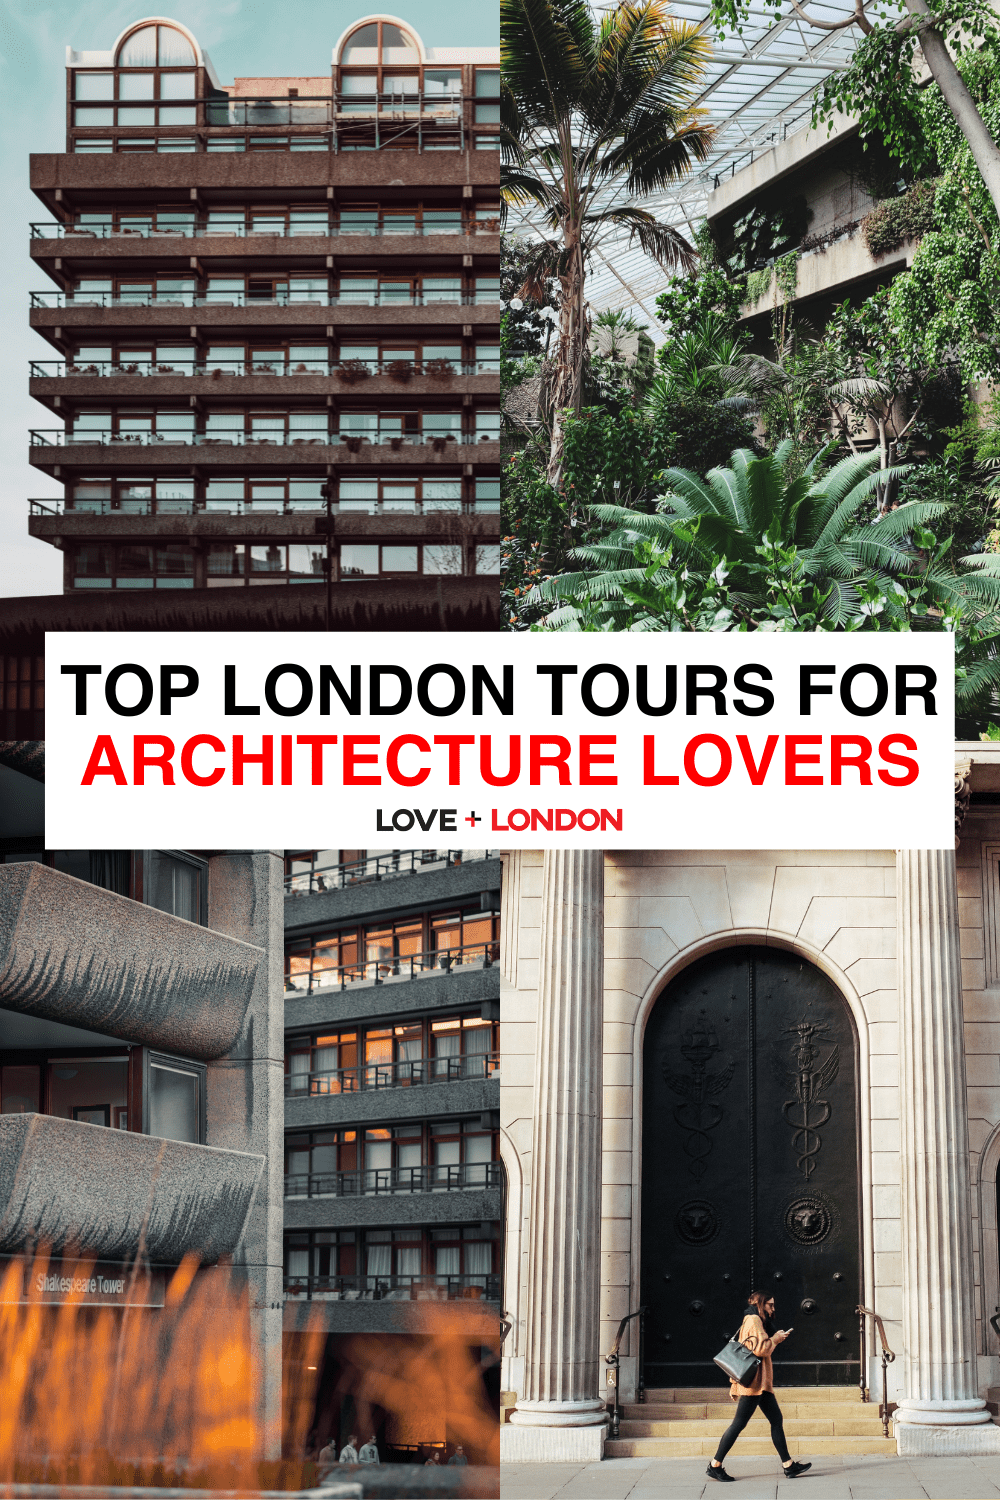 Top London Tours for Architecture Lovers